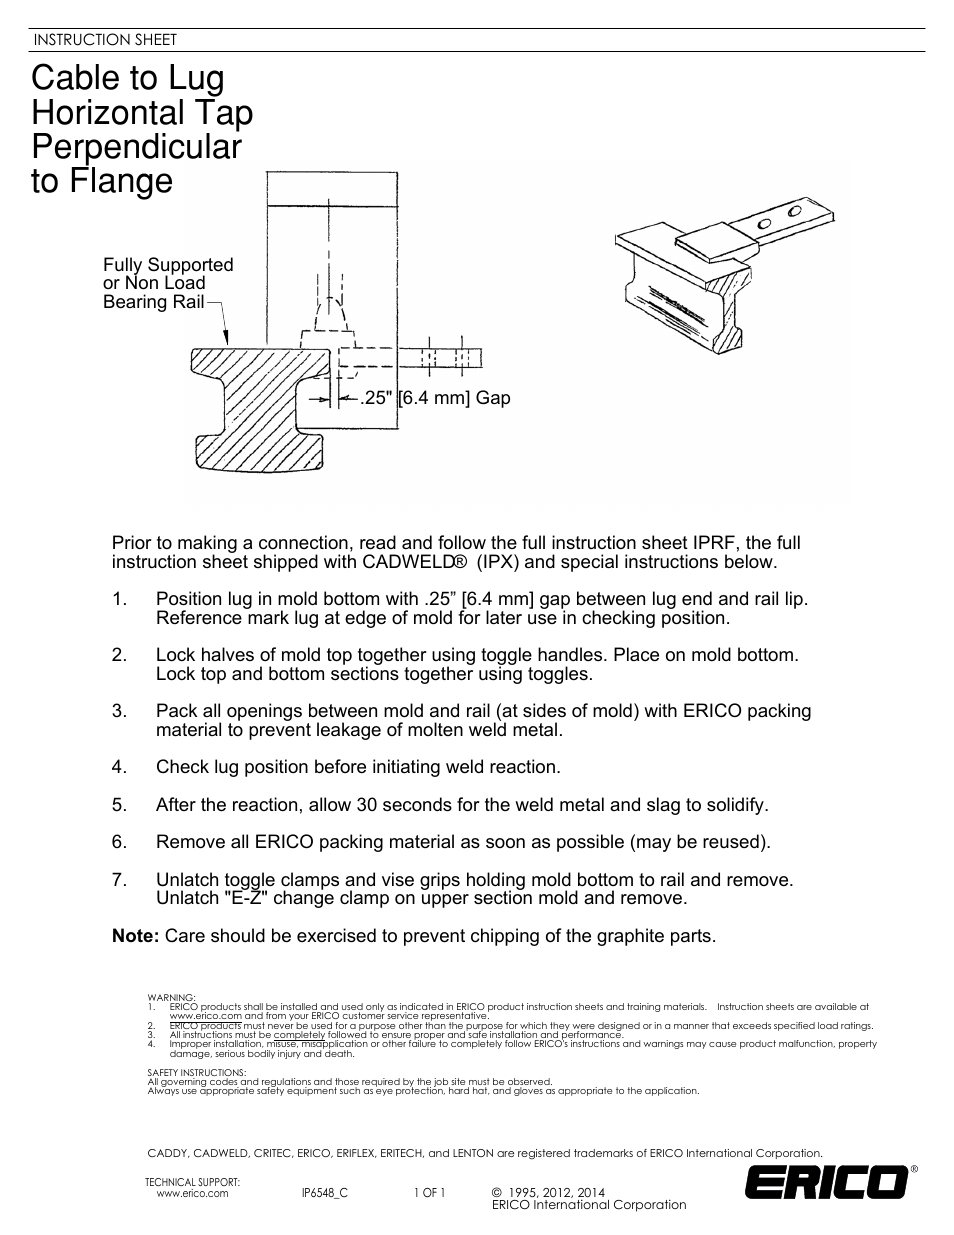 IP6548 Cable to Lug Horizontal Tap Perpendicular to Flange